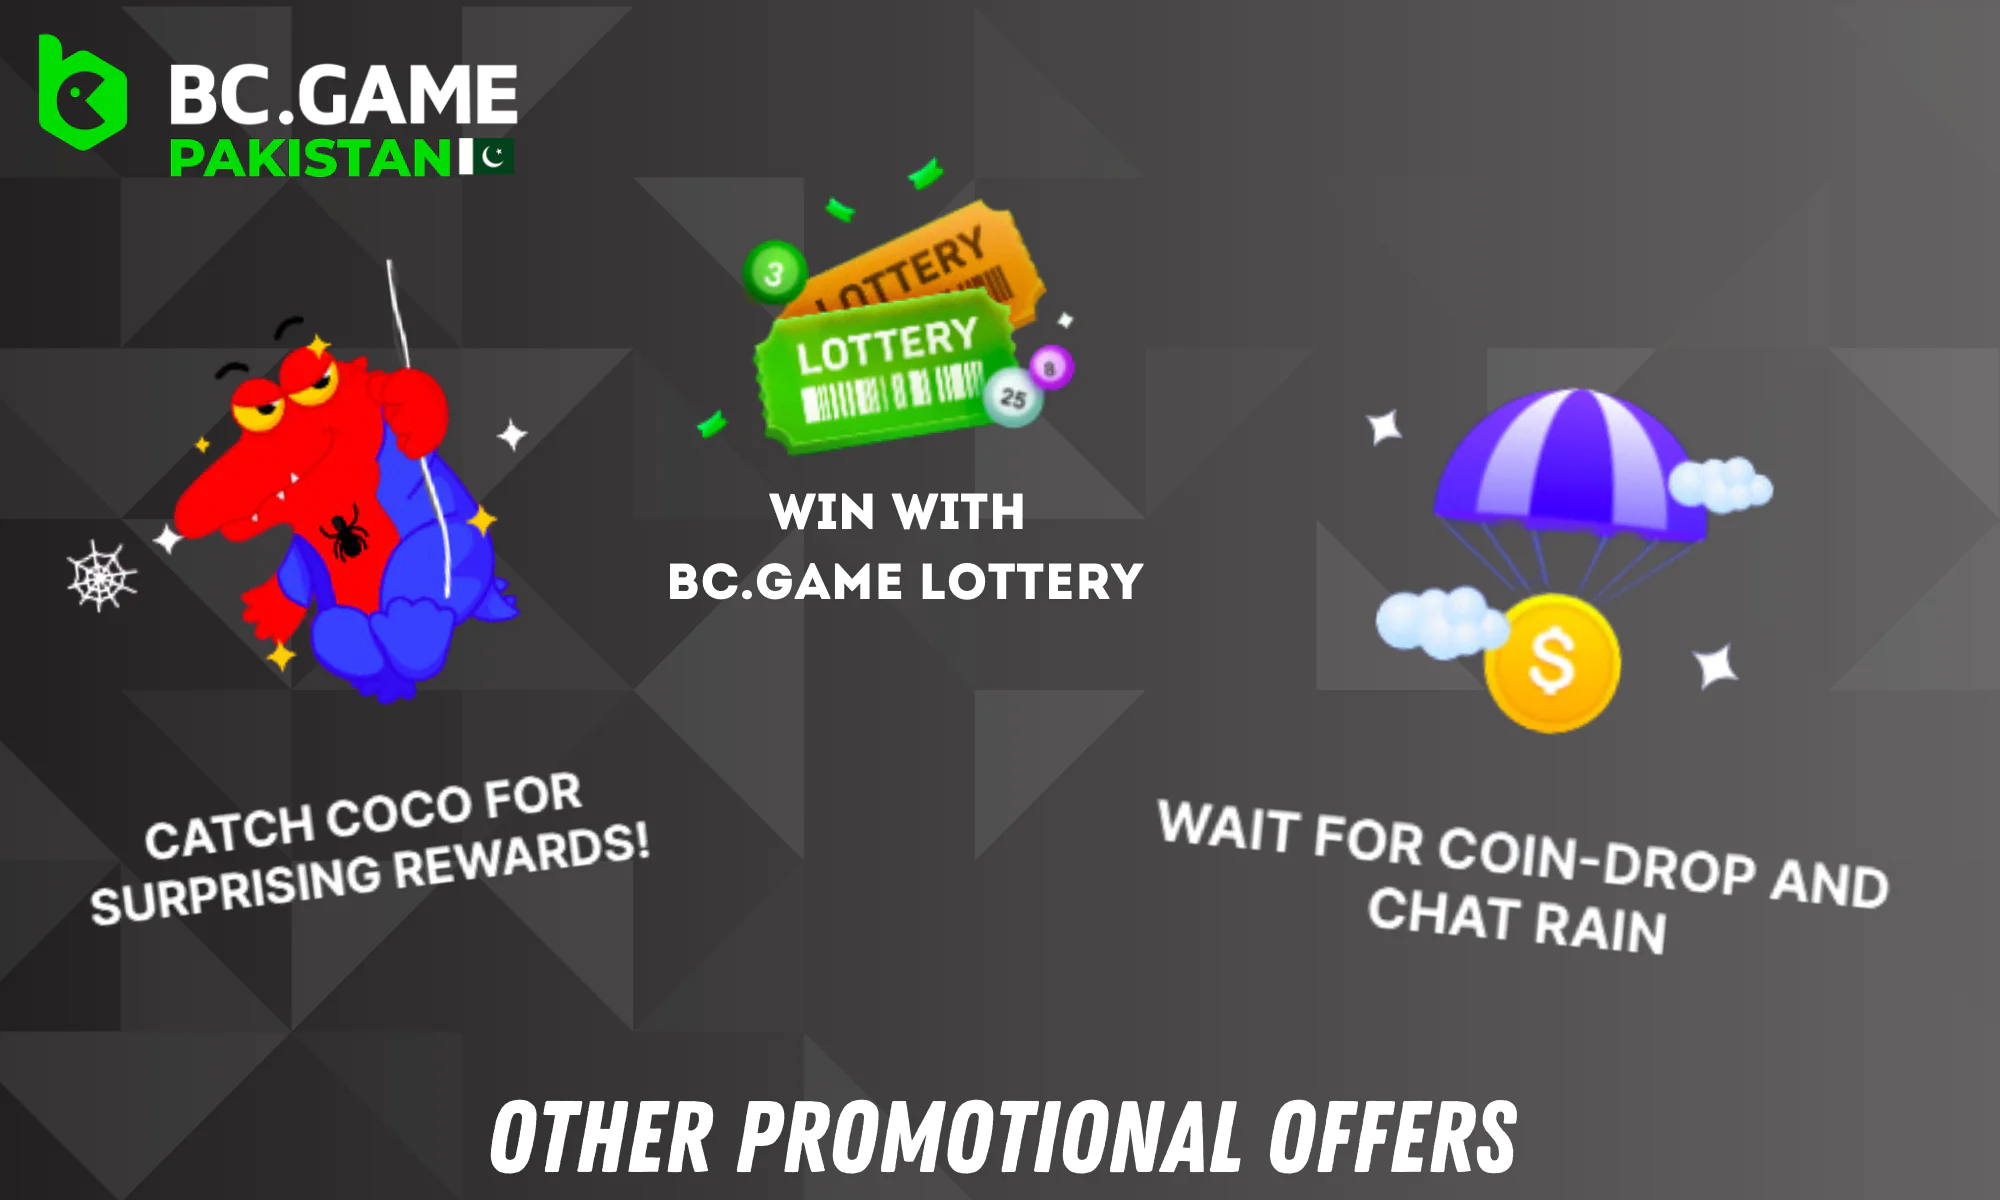 The site has many exclusive bonus offers from BC Game